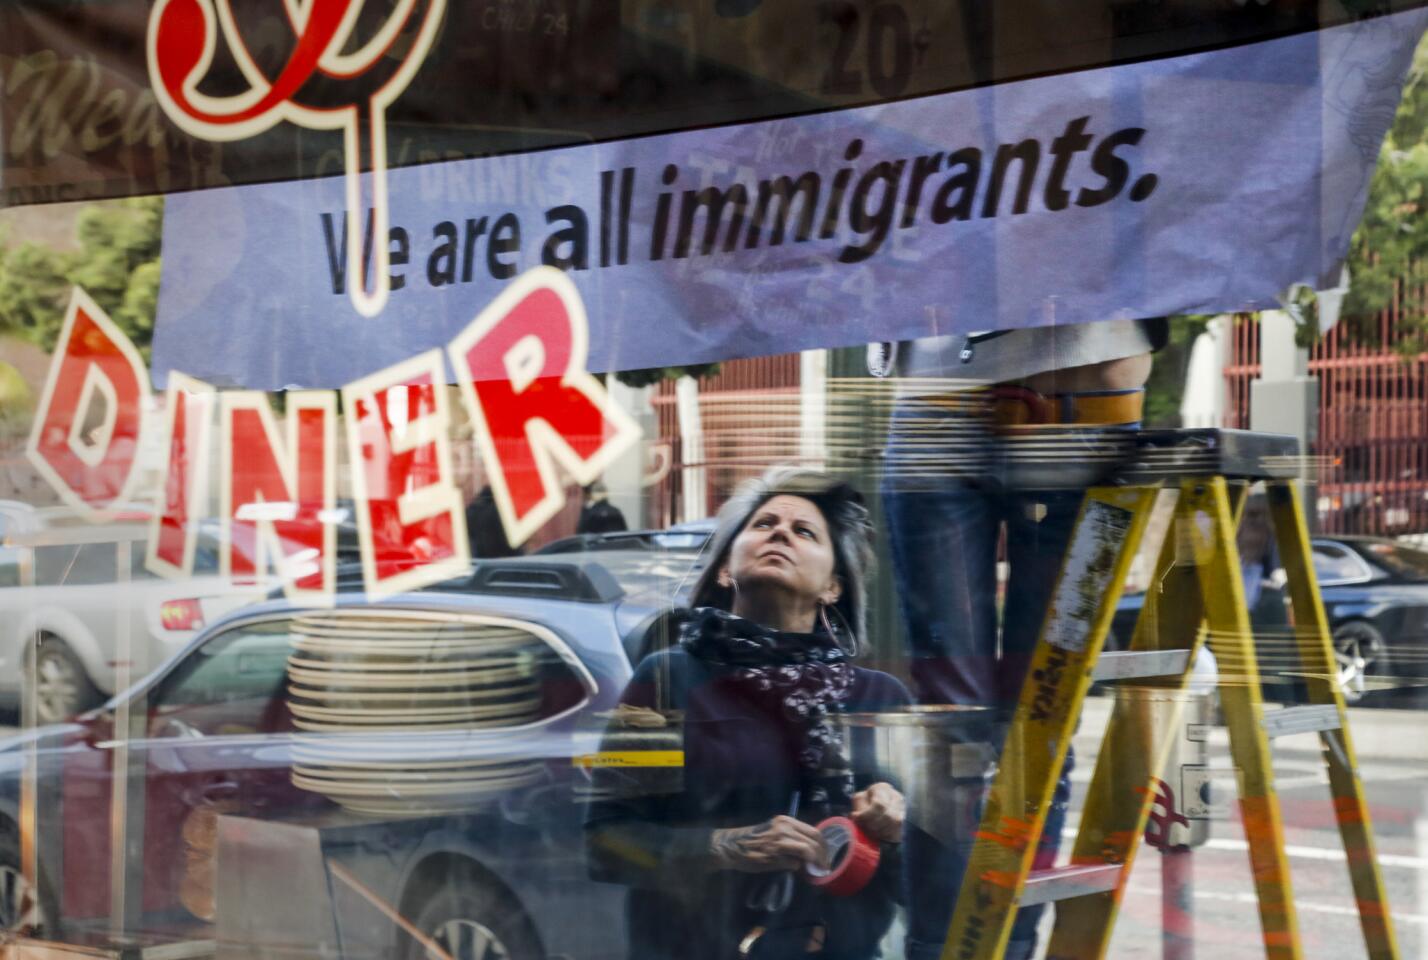 After closing their restaurant for the day, Monica May watches while her partner Kristen Trattner hangs a sign above their Nickel Diner in Downtown Los Angeles in solidarity with a national "Day Without Immigrants."